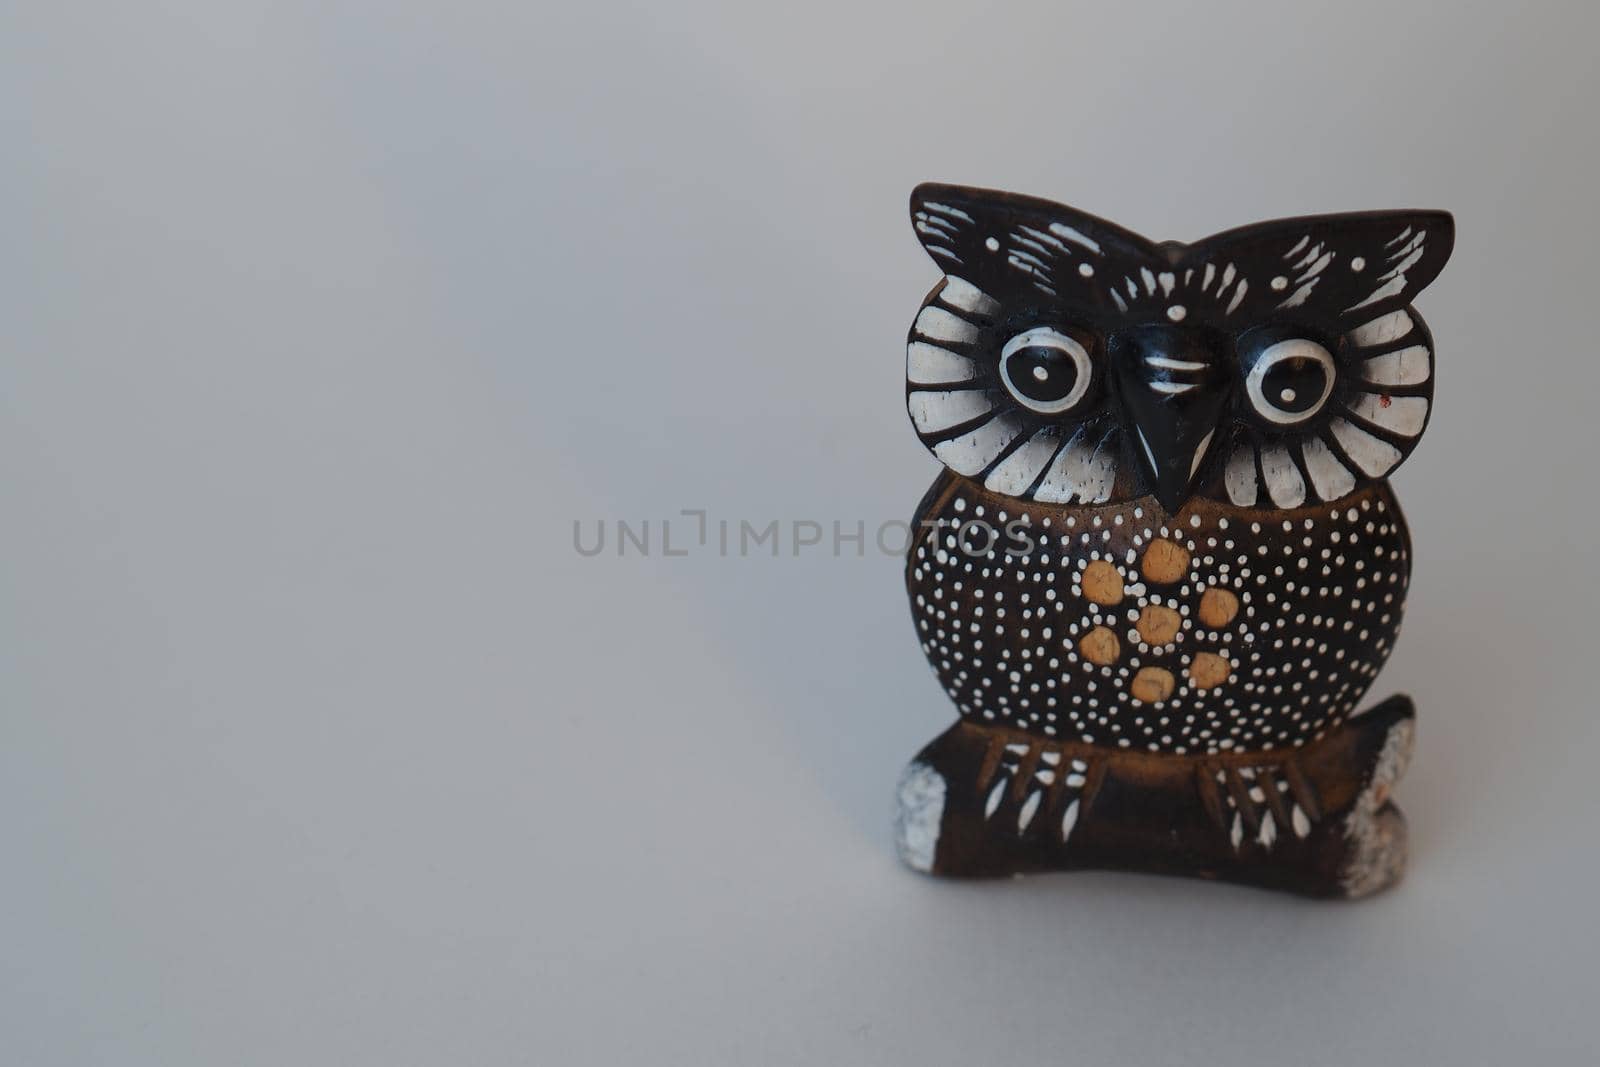 Birds and animals. Statuette of an owl. Toys made of wood. by Olga26